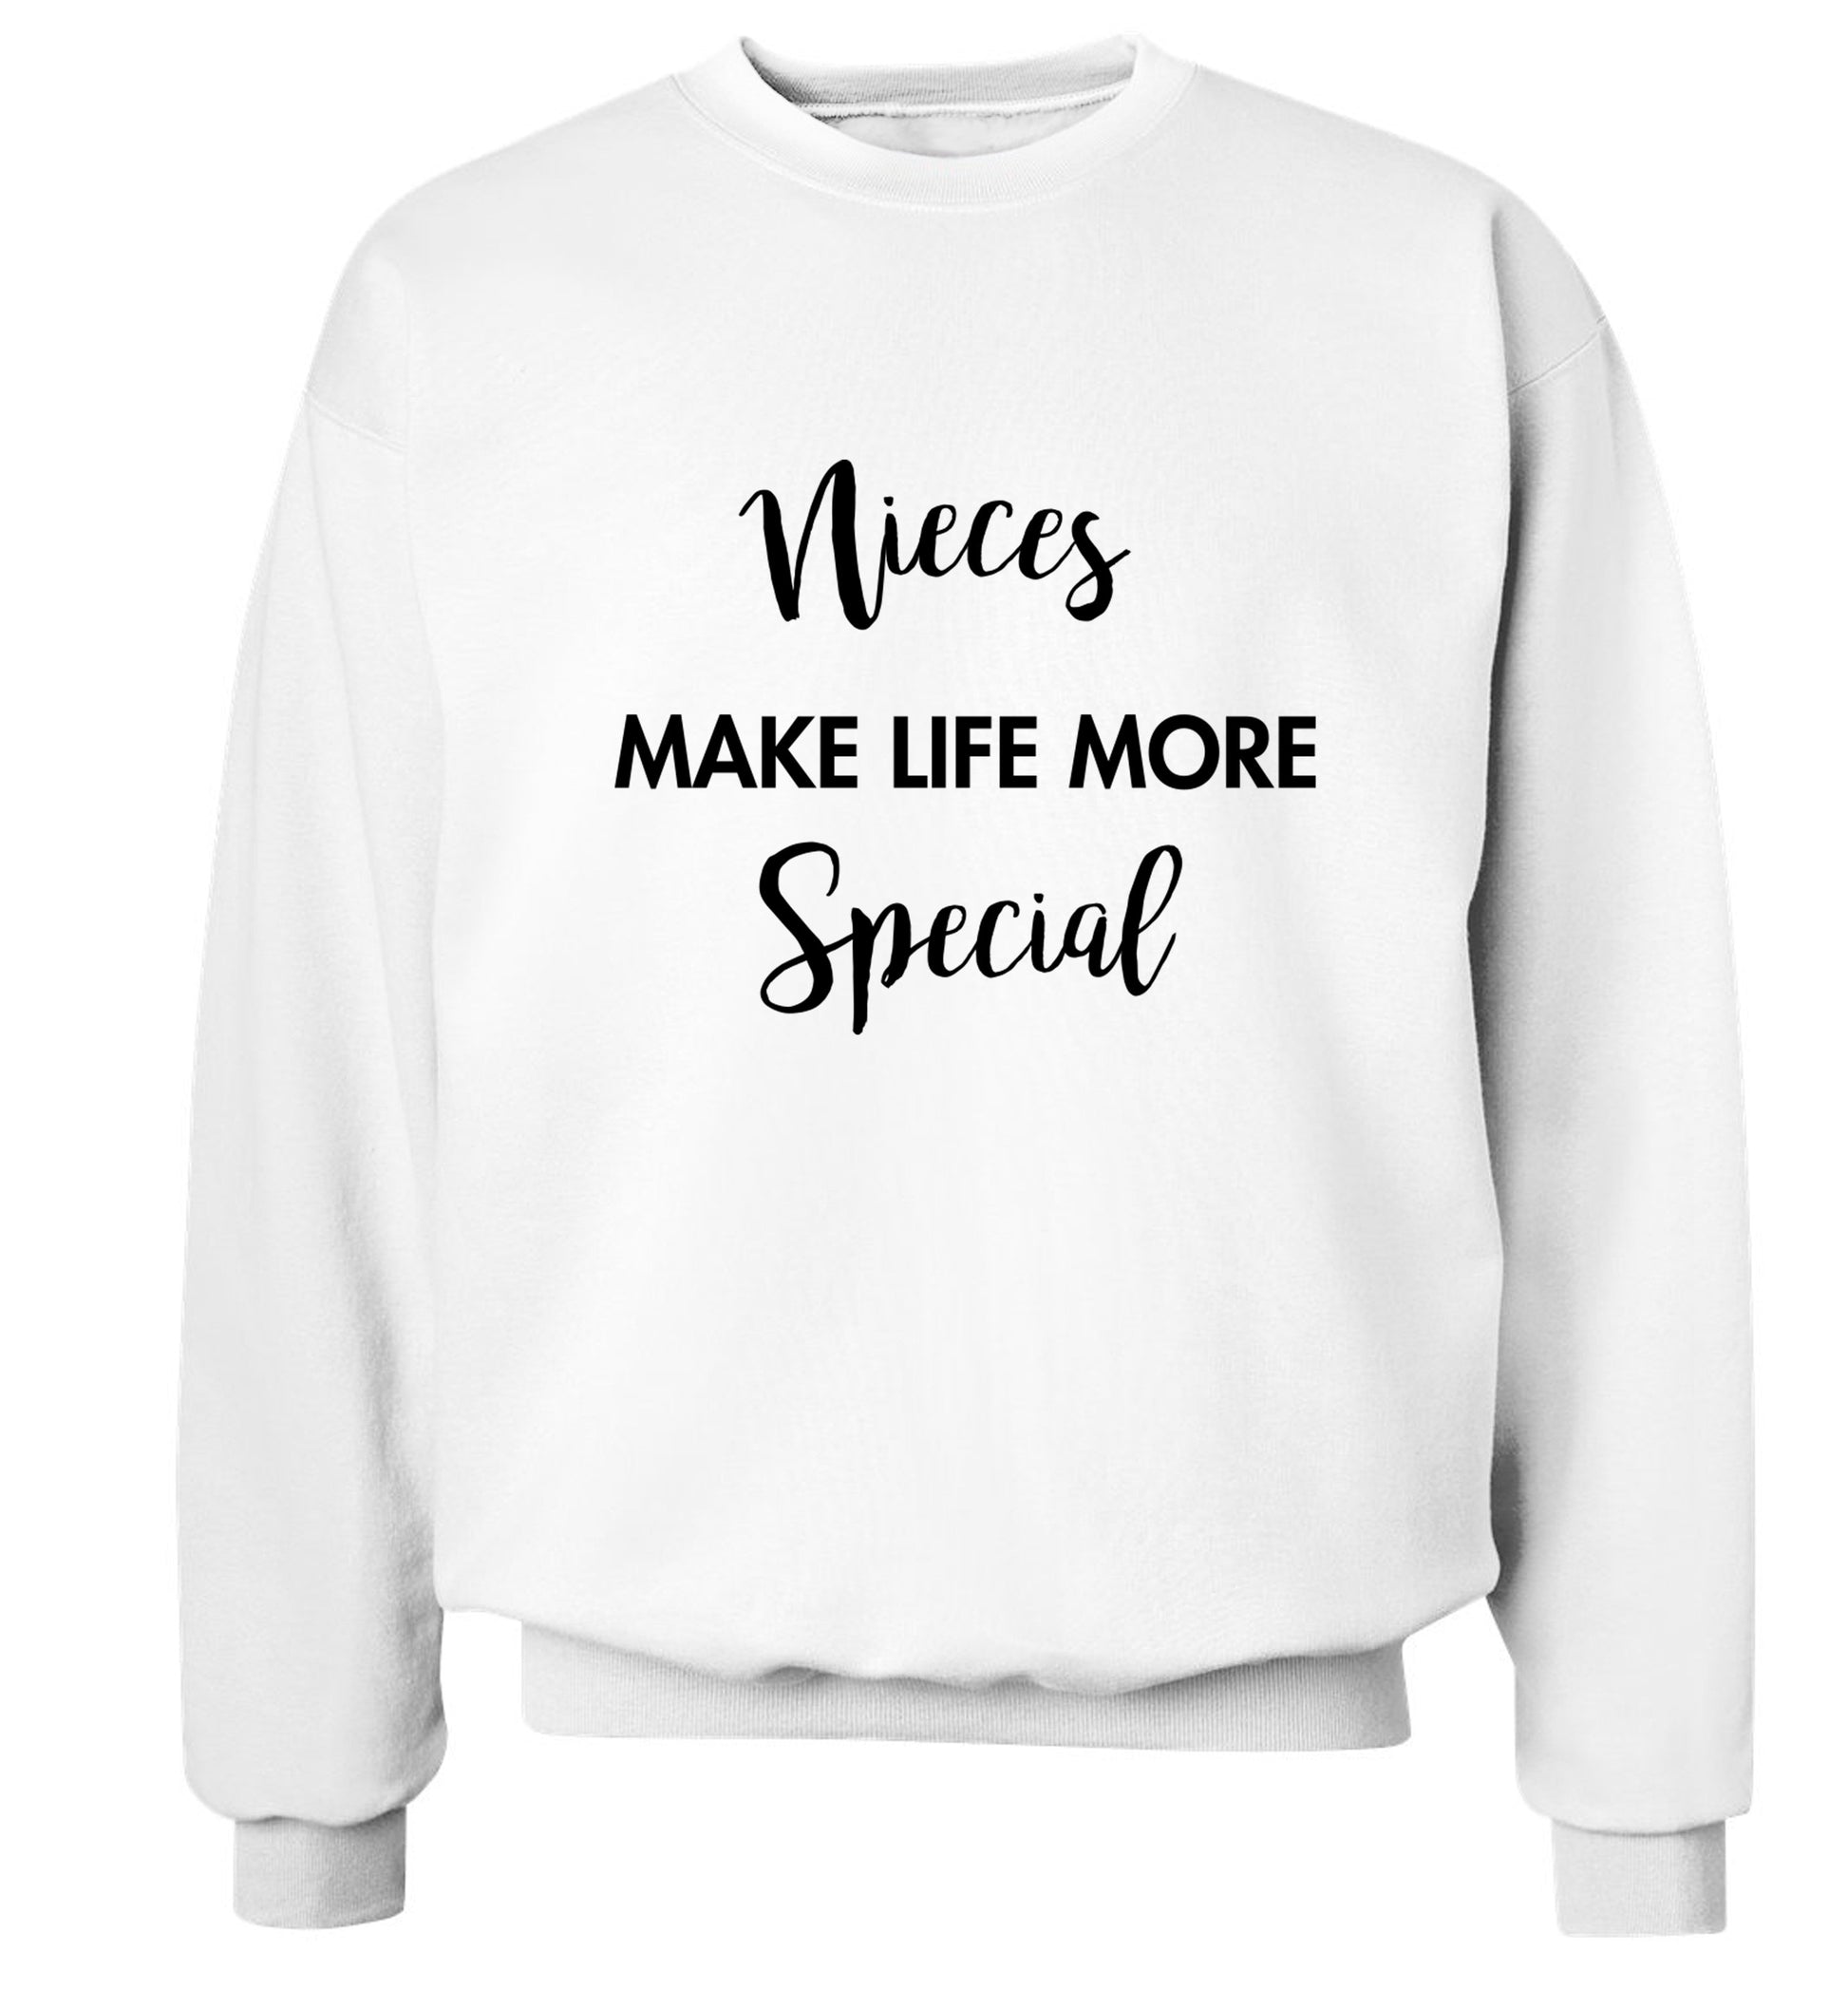 Nieces make life more special Adult's unisex white Sweater 2XL